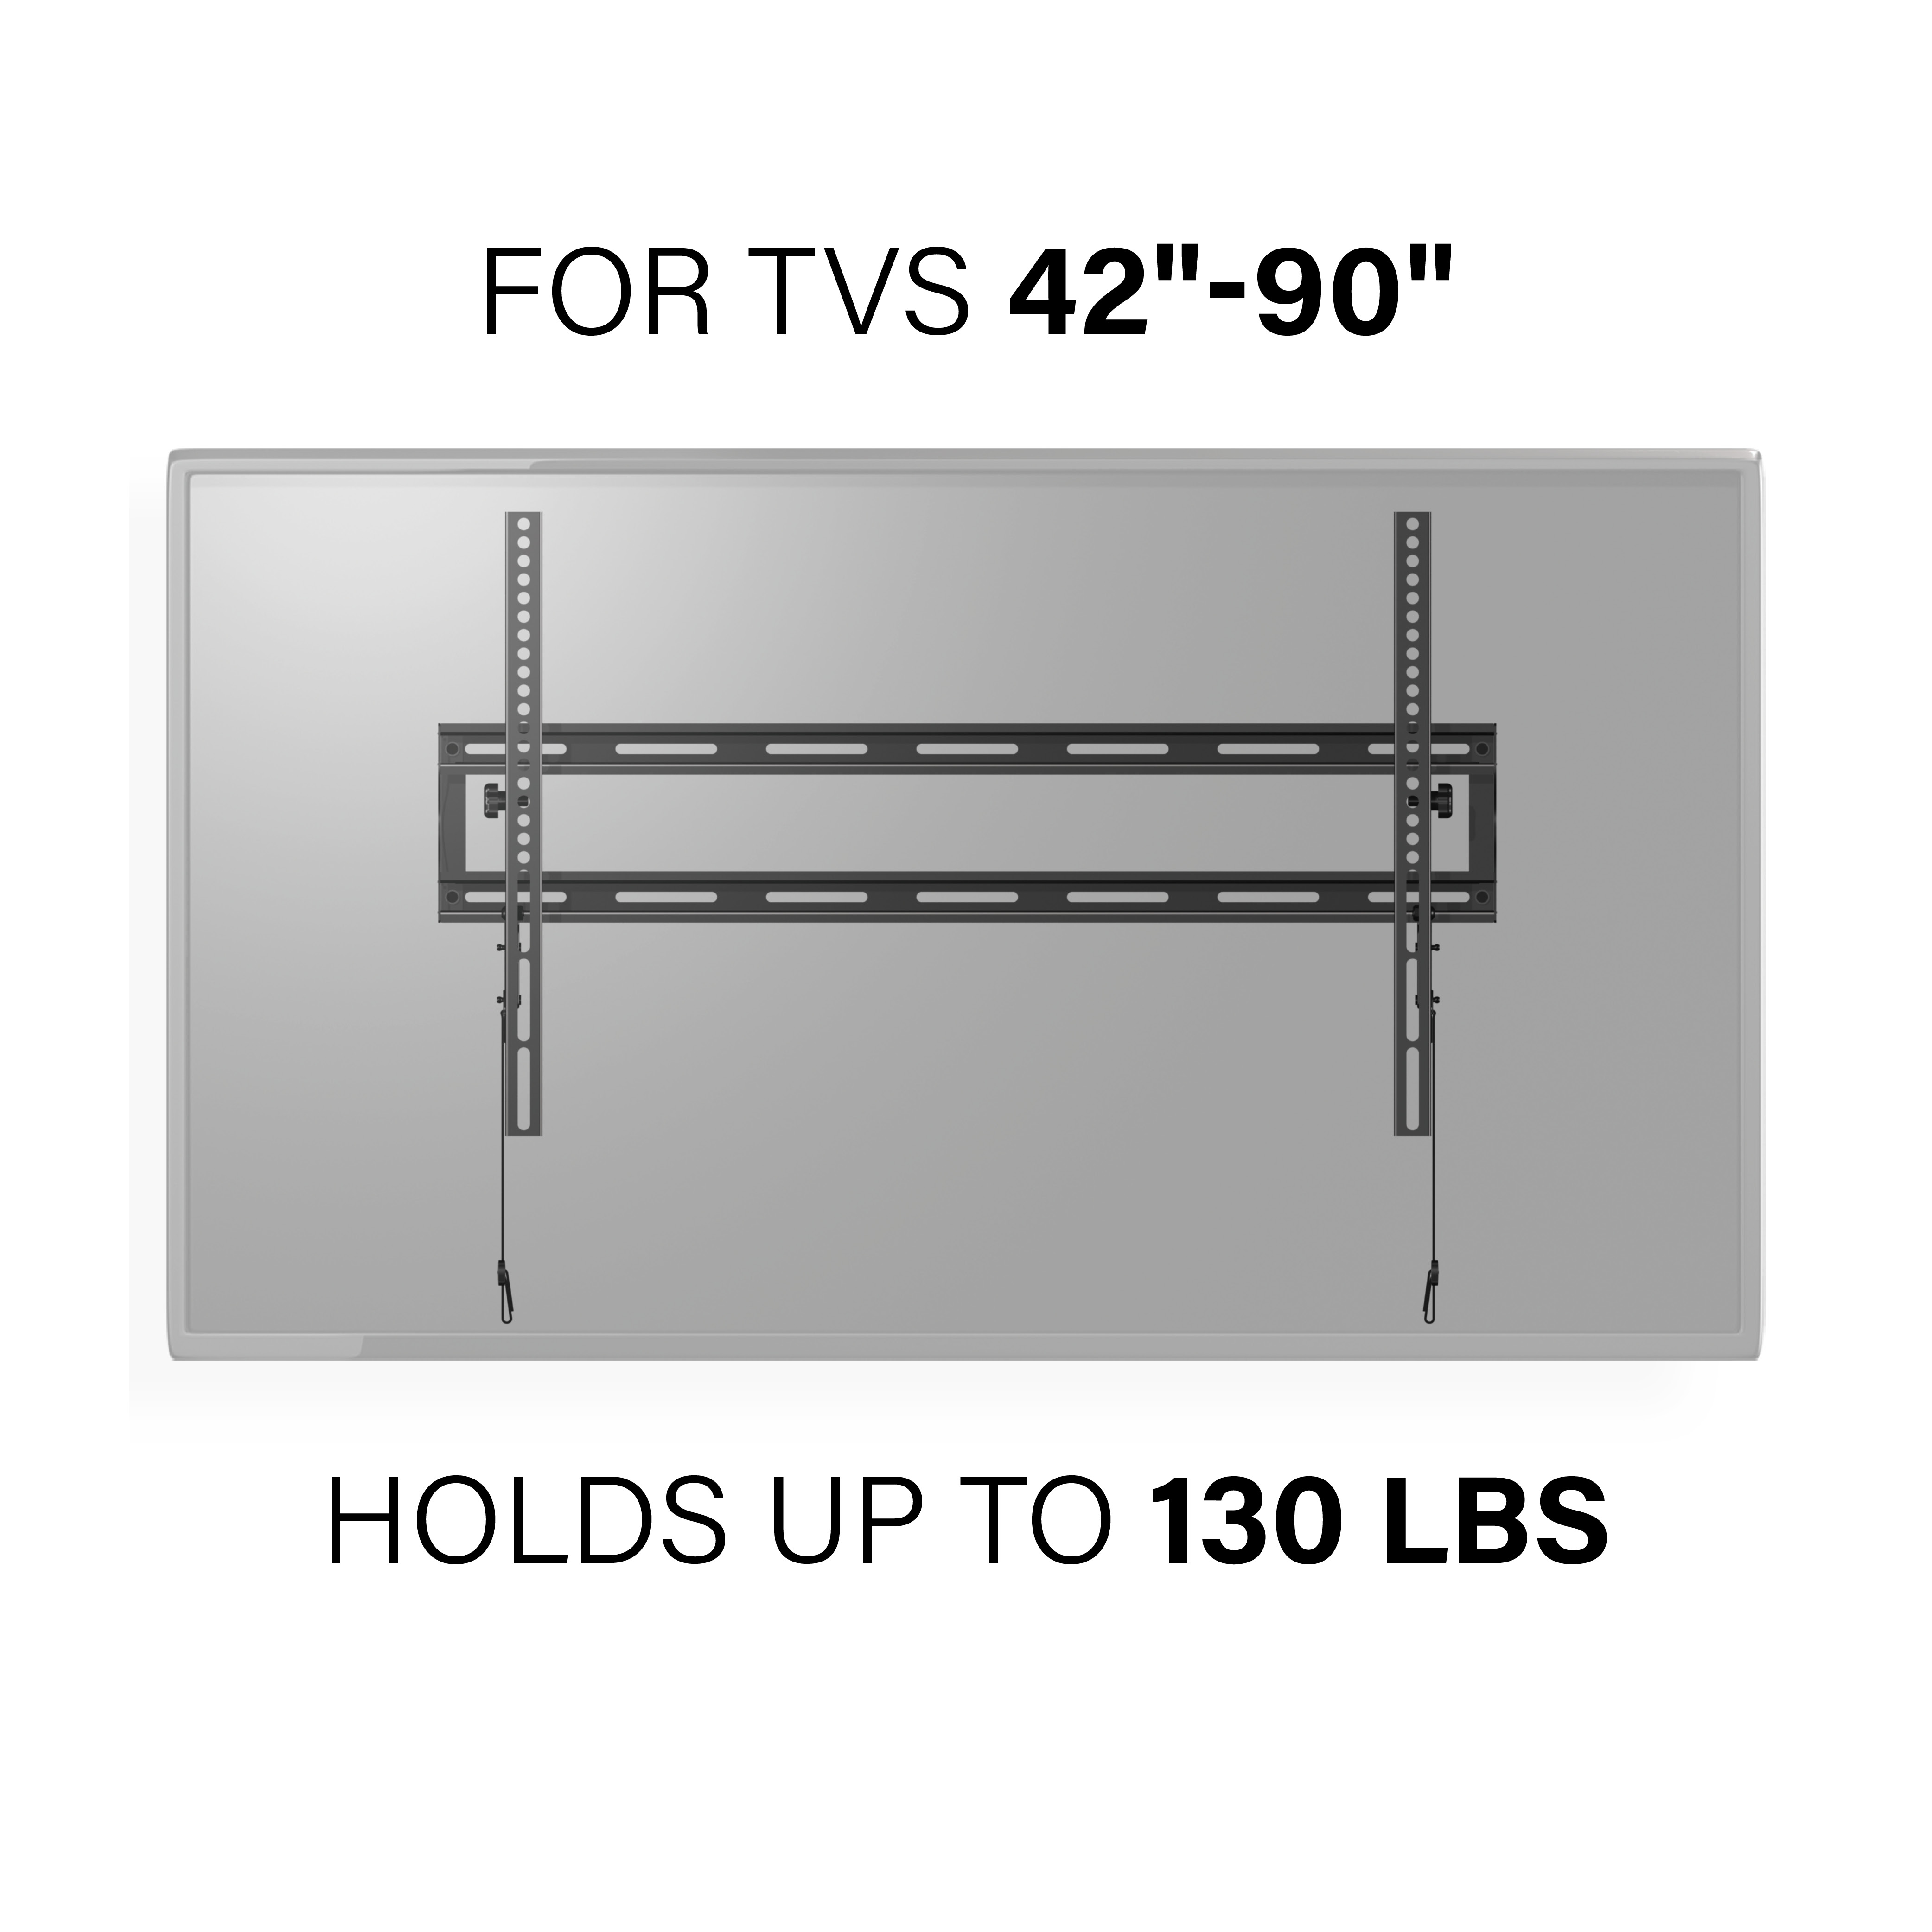 Sanus Vuepoint Tilting TV Wall Mount for TVs 42"-90" up to 130lbs - Easily Tilt to Reduce Glare and Reflections - FLT35 - image 3 of 9